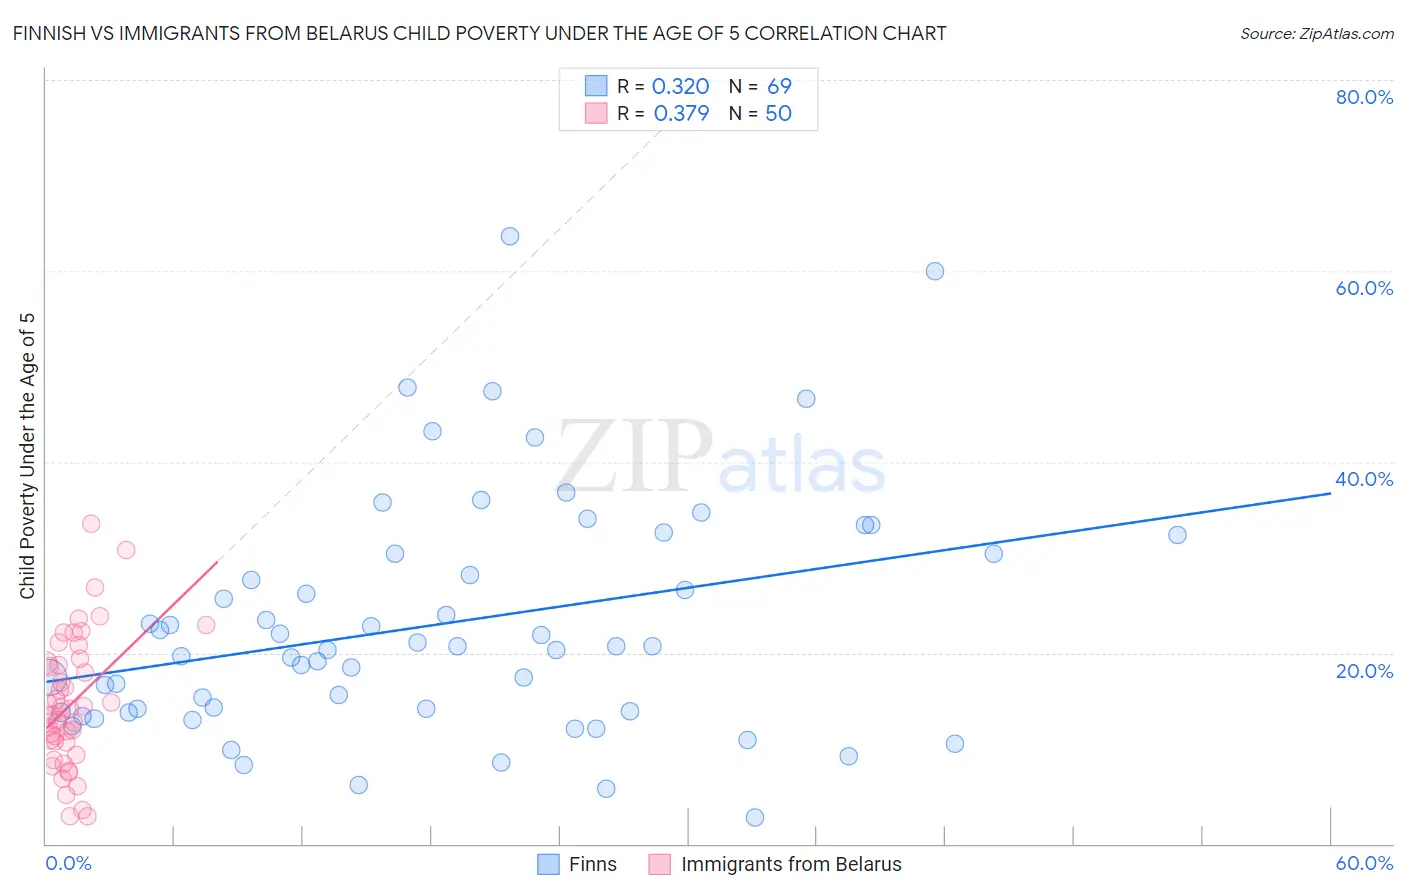 Finnish vs Immigrants from Belarus Child Poverty Under the Age of 5